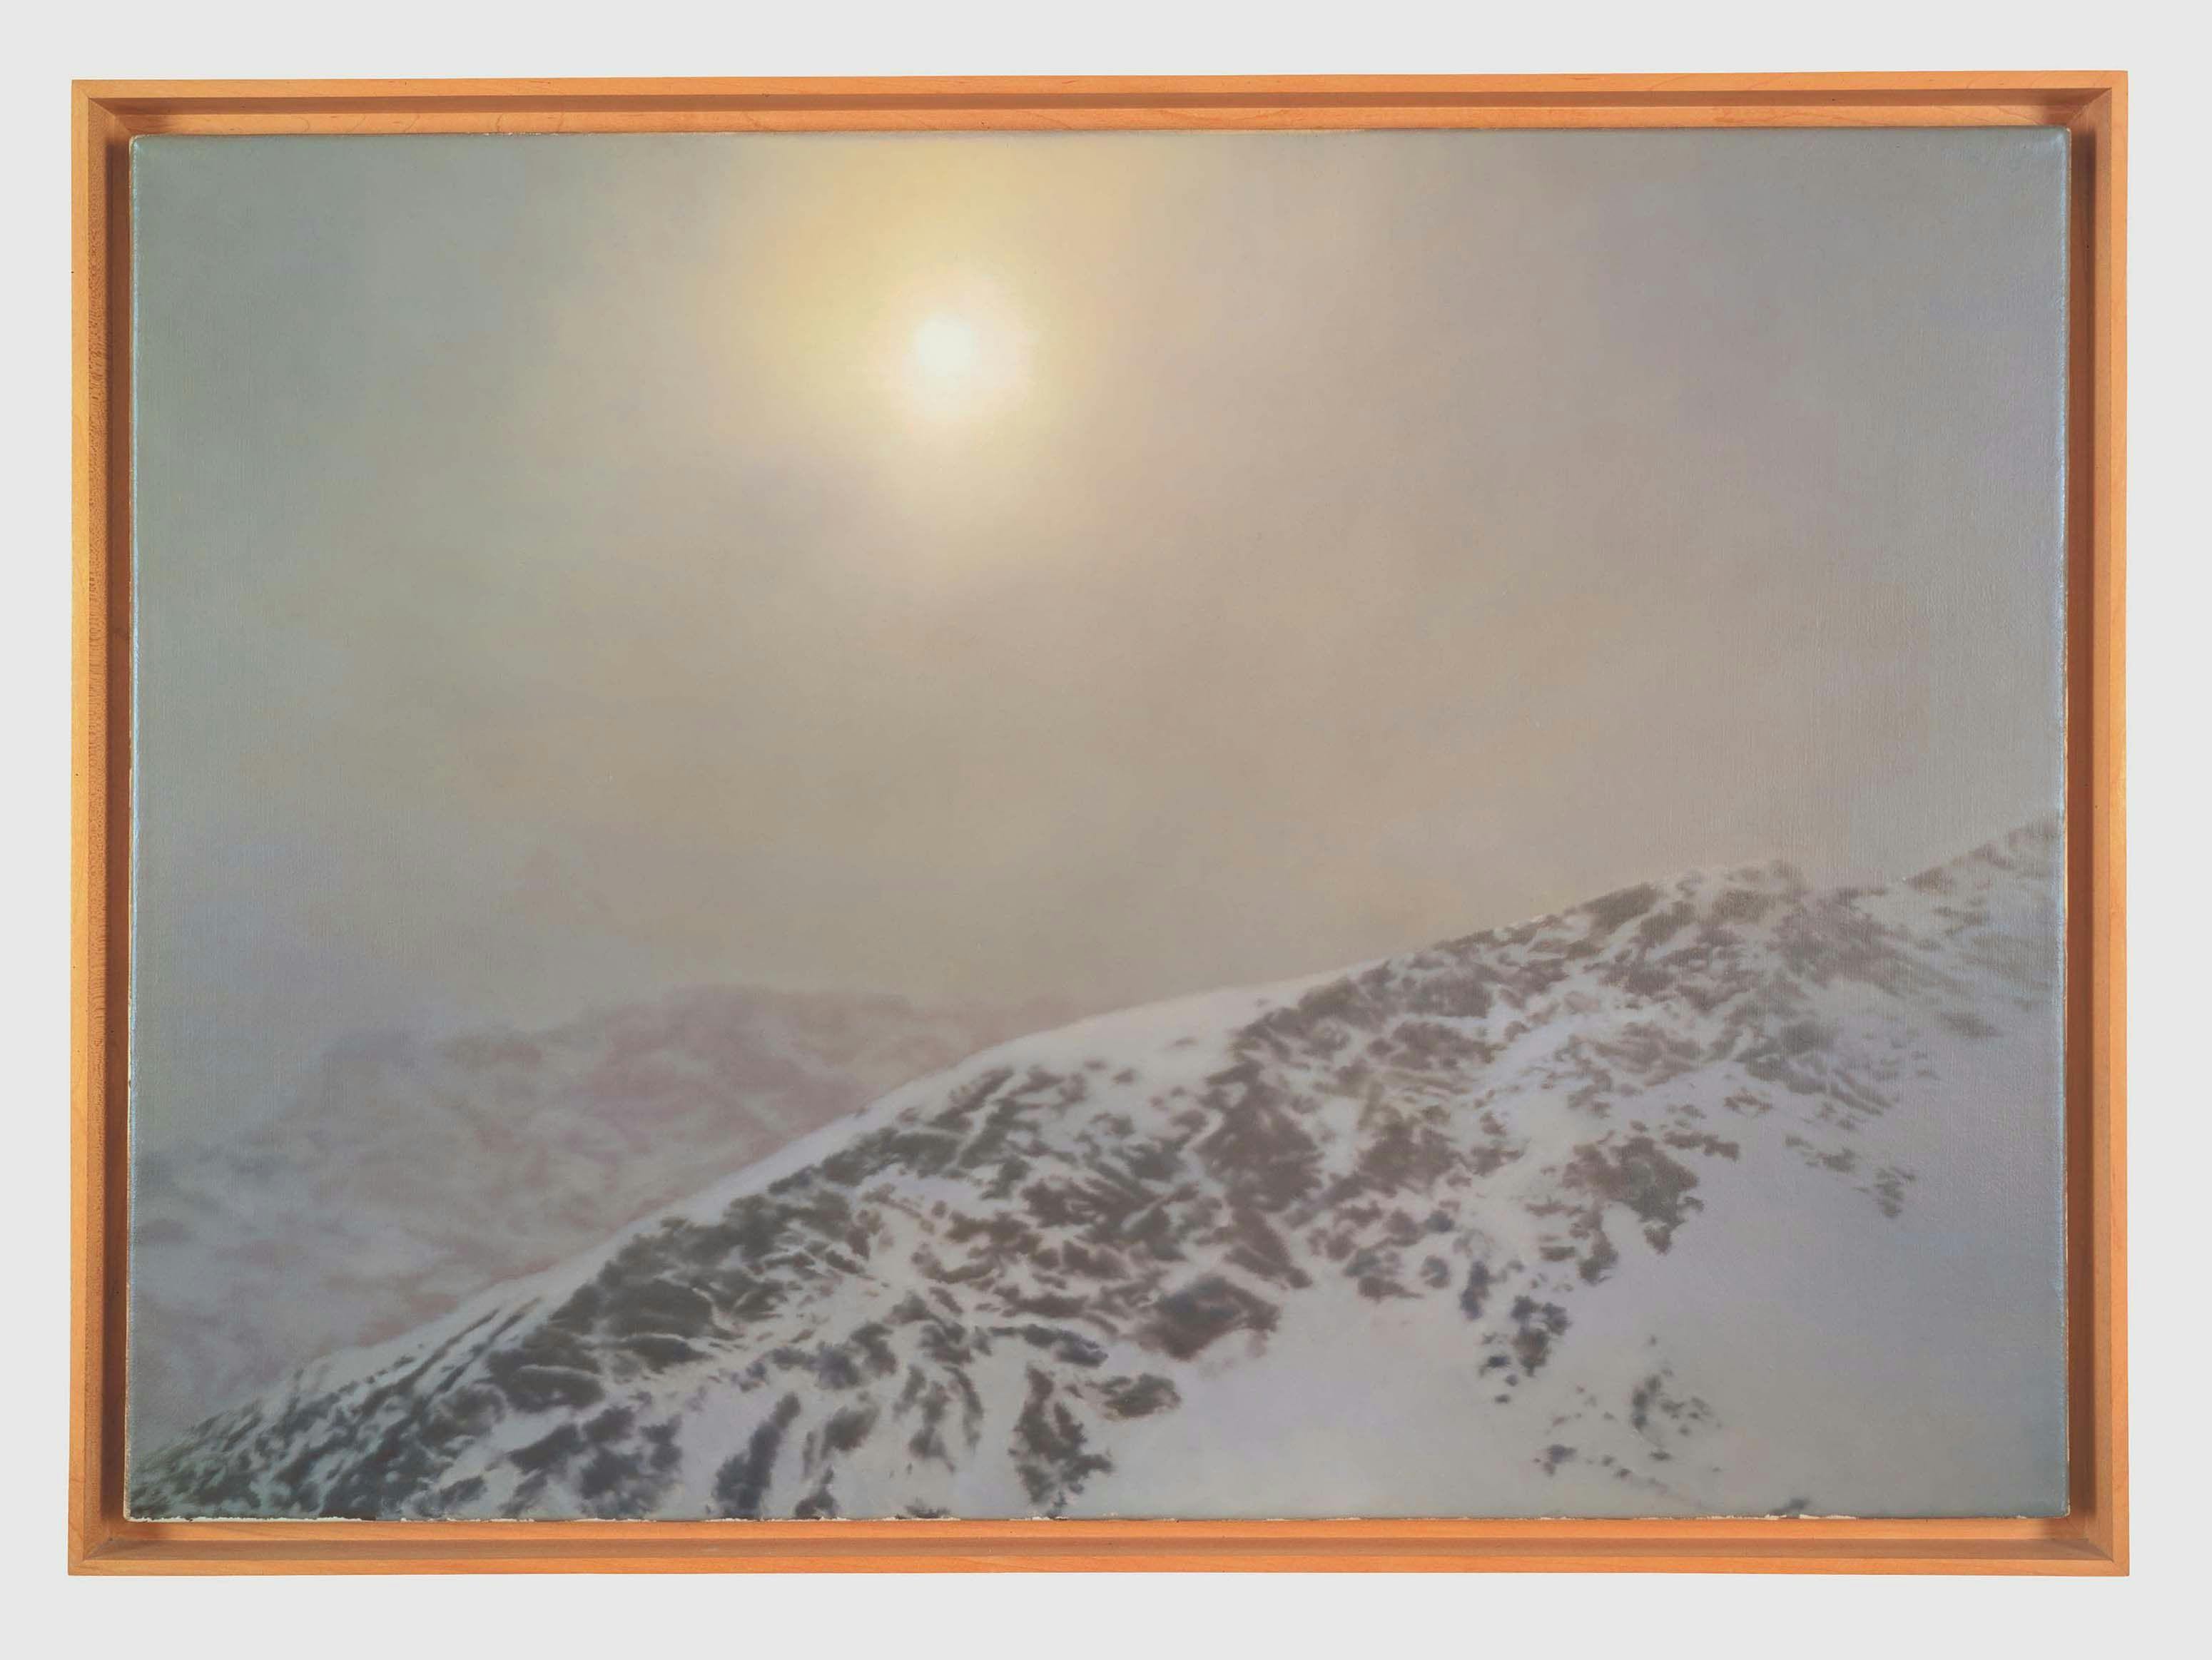 A painting by Gerhard Richter, titled Davos, dated 1981.